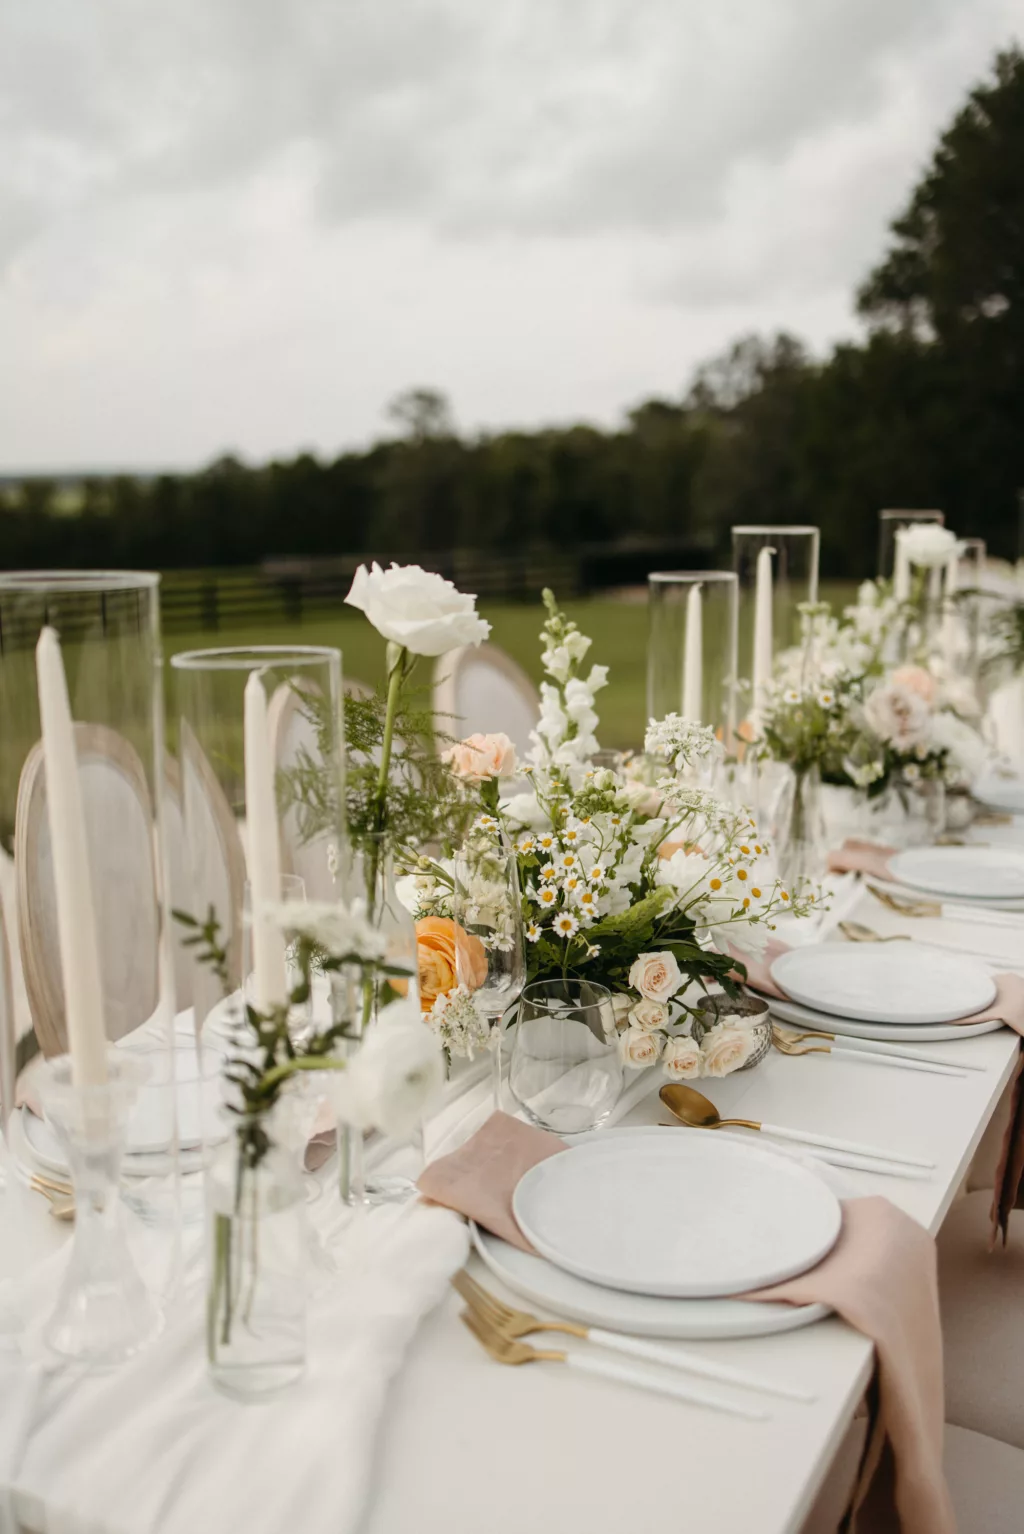 Neutral Spring European Inspired Wedding Reception Tablescape Ideas | Gold and White Flatware Inspiration | Taper Candles, White Roses and Feverfew Daisy Centerpiece Decor | Tampa Bay Event Planner The Olive Tree Weddings